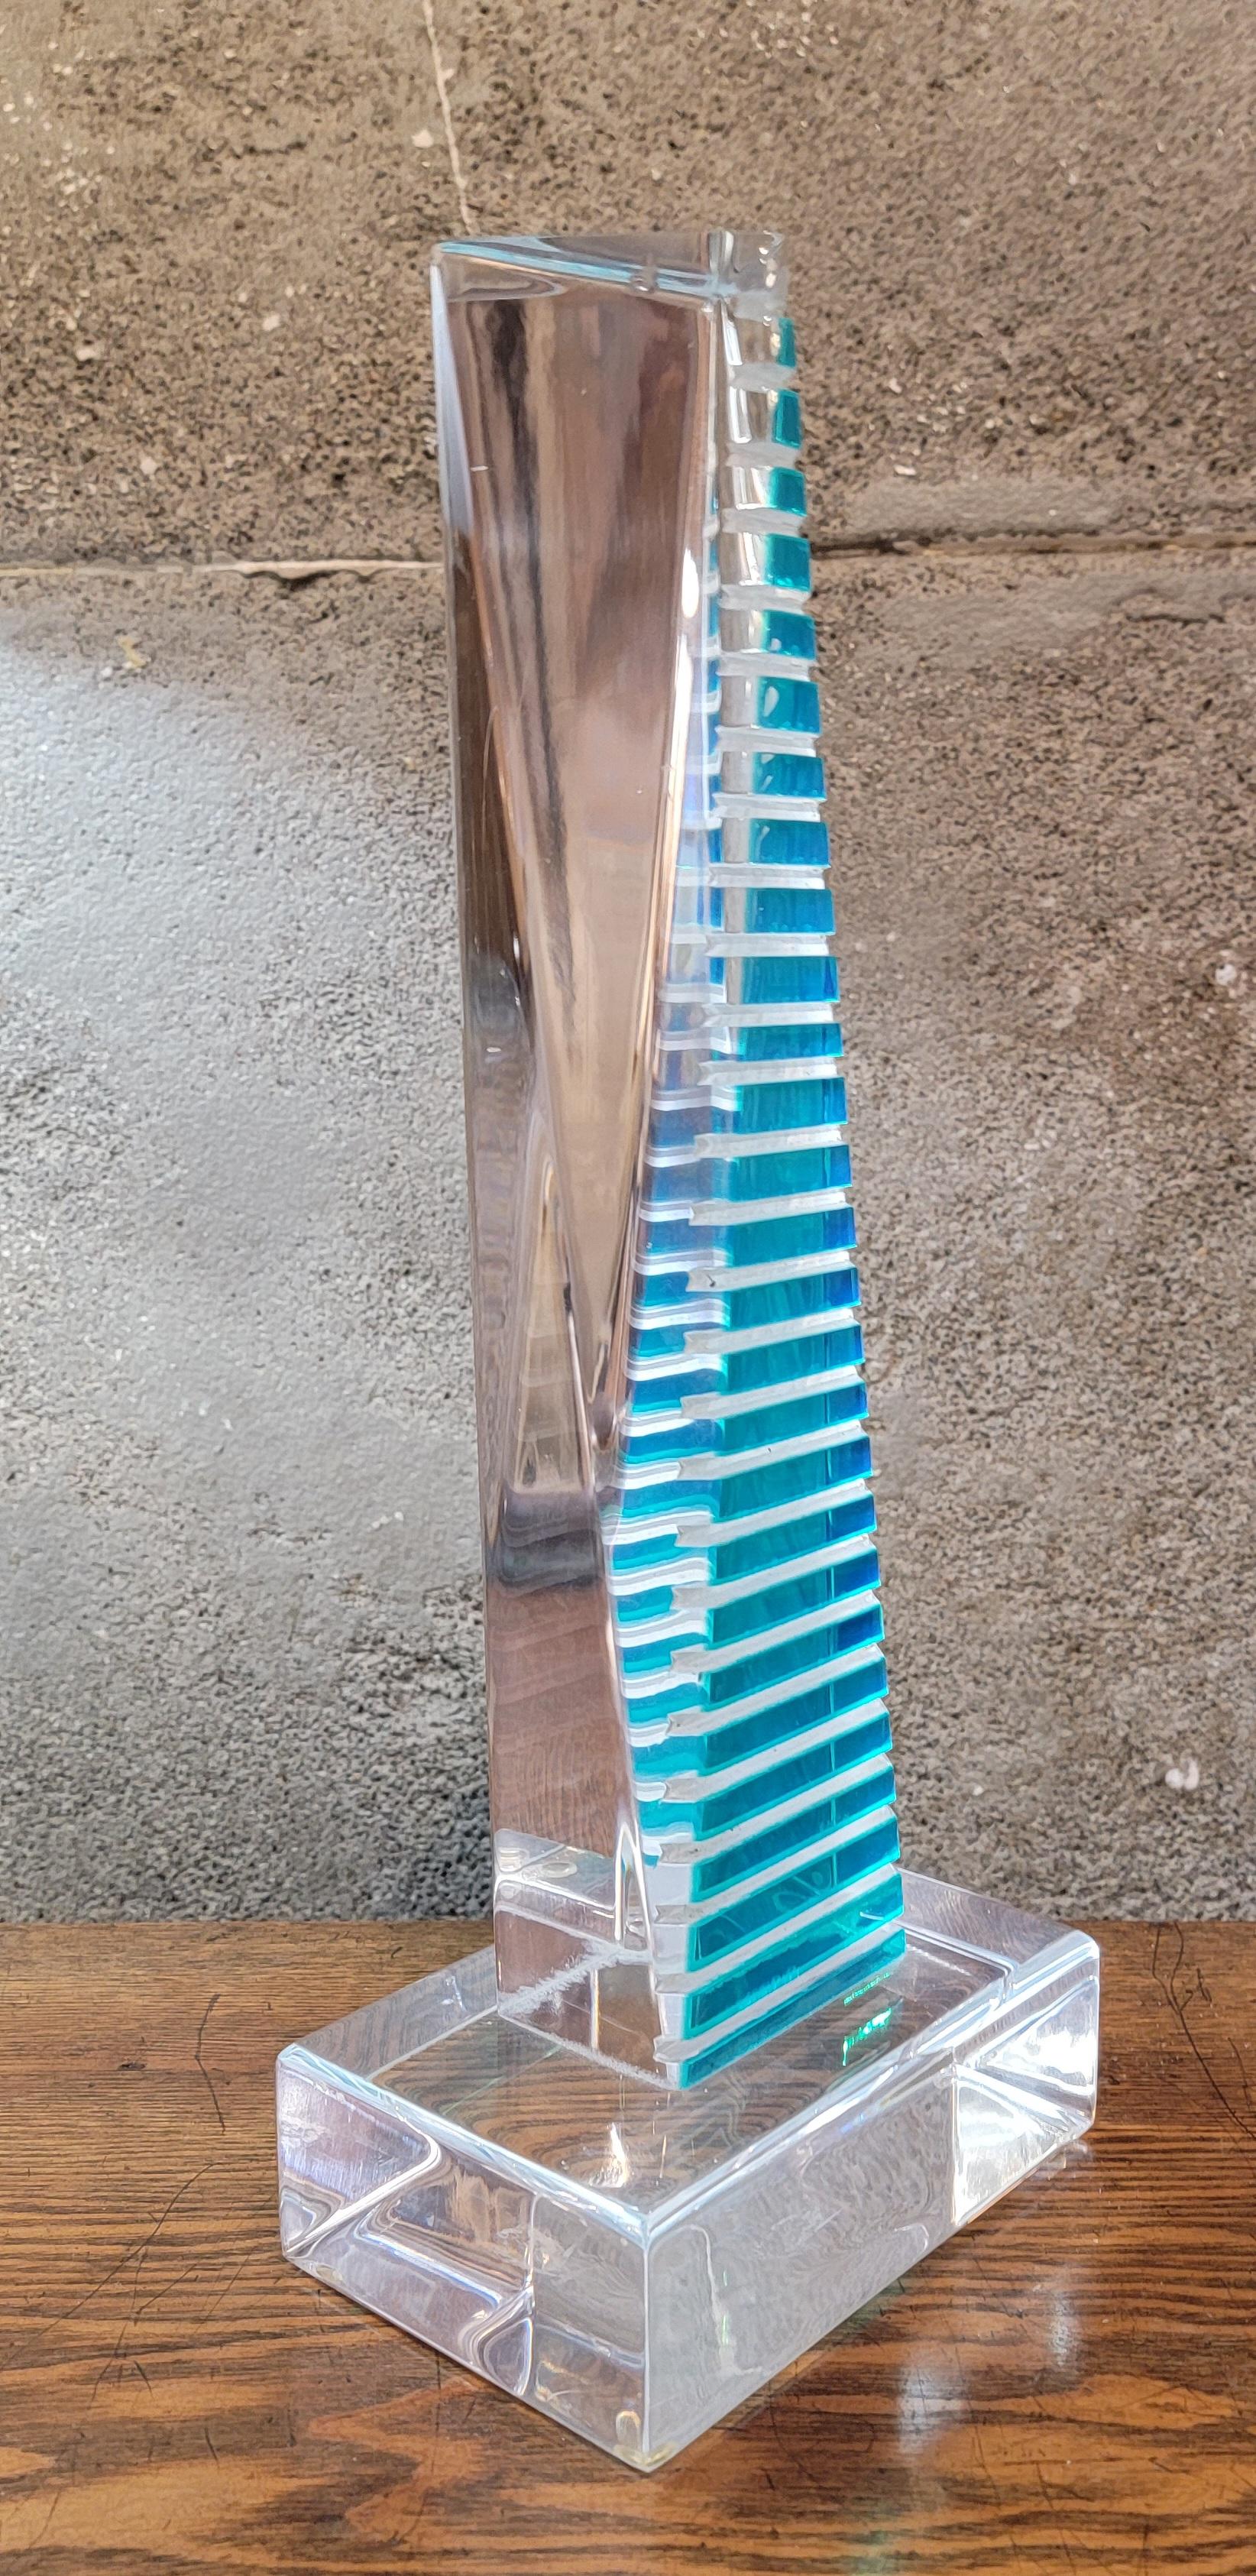 Geometric Acrylic / Lucite Table Sculpture In Good Condition For Sale In Fulton, CA